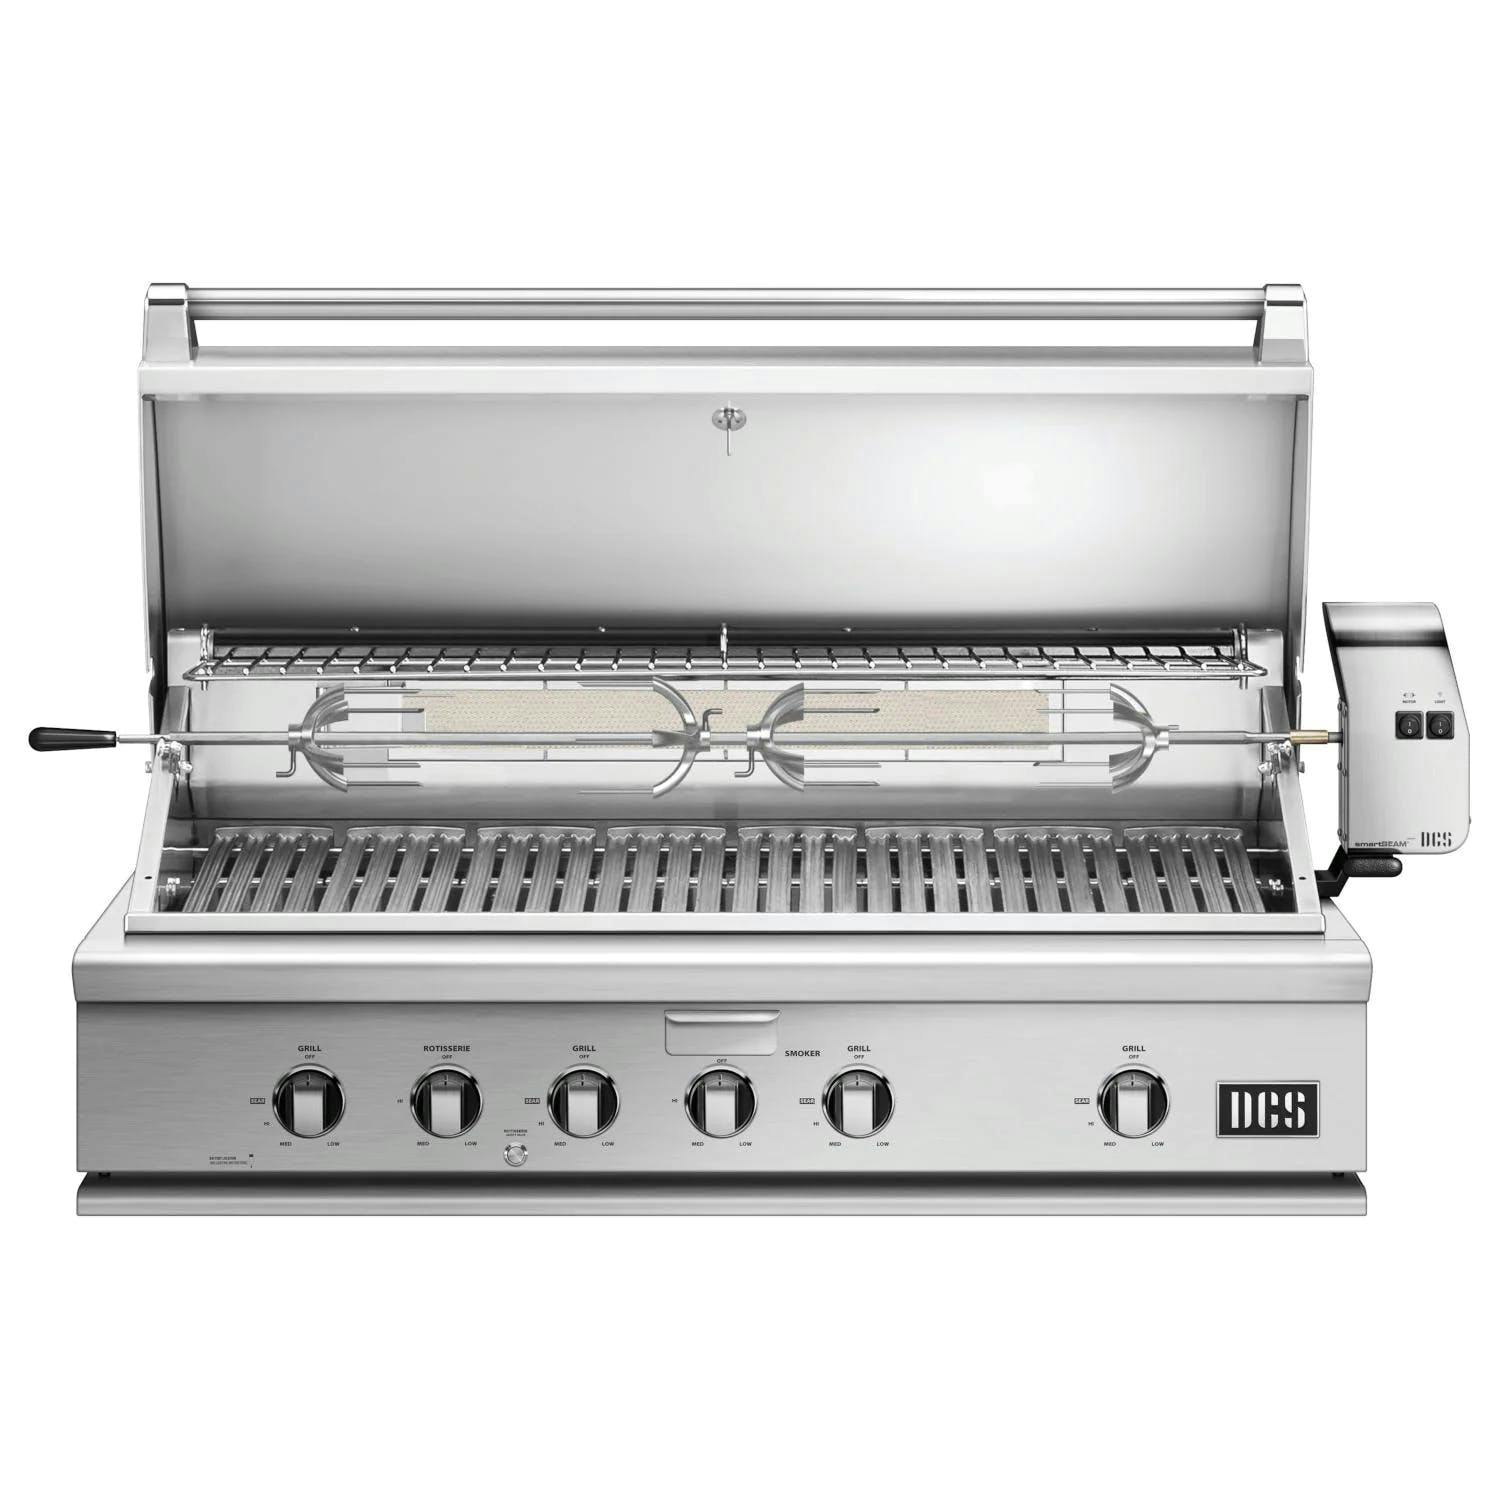 DCS Series 7 Traditional Built-in Gas Grill with Double Side Burner & Rotisserie